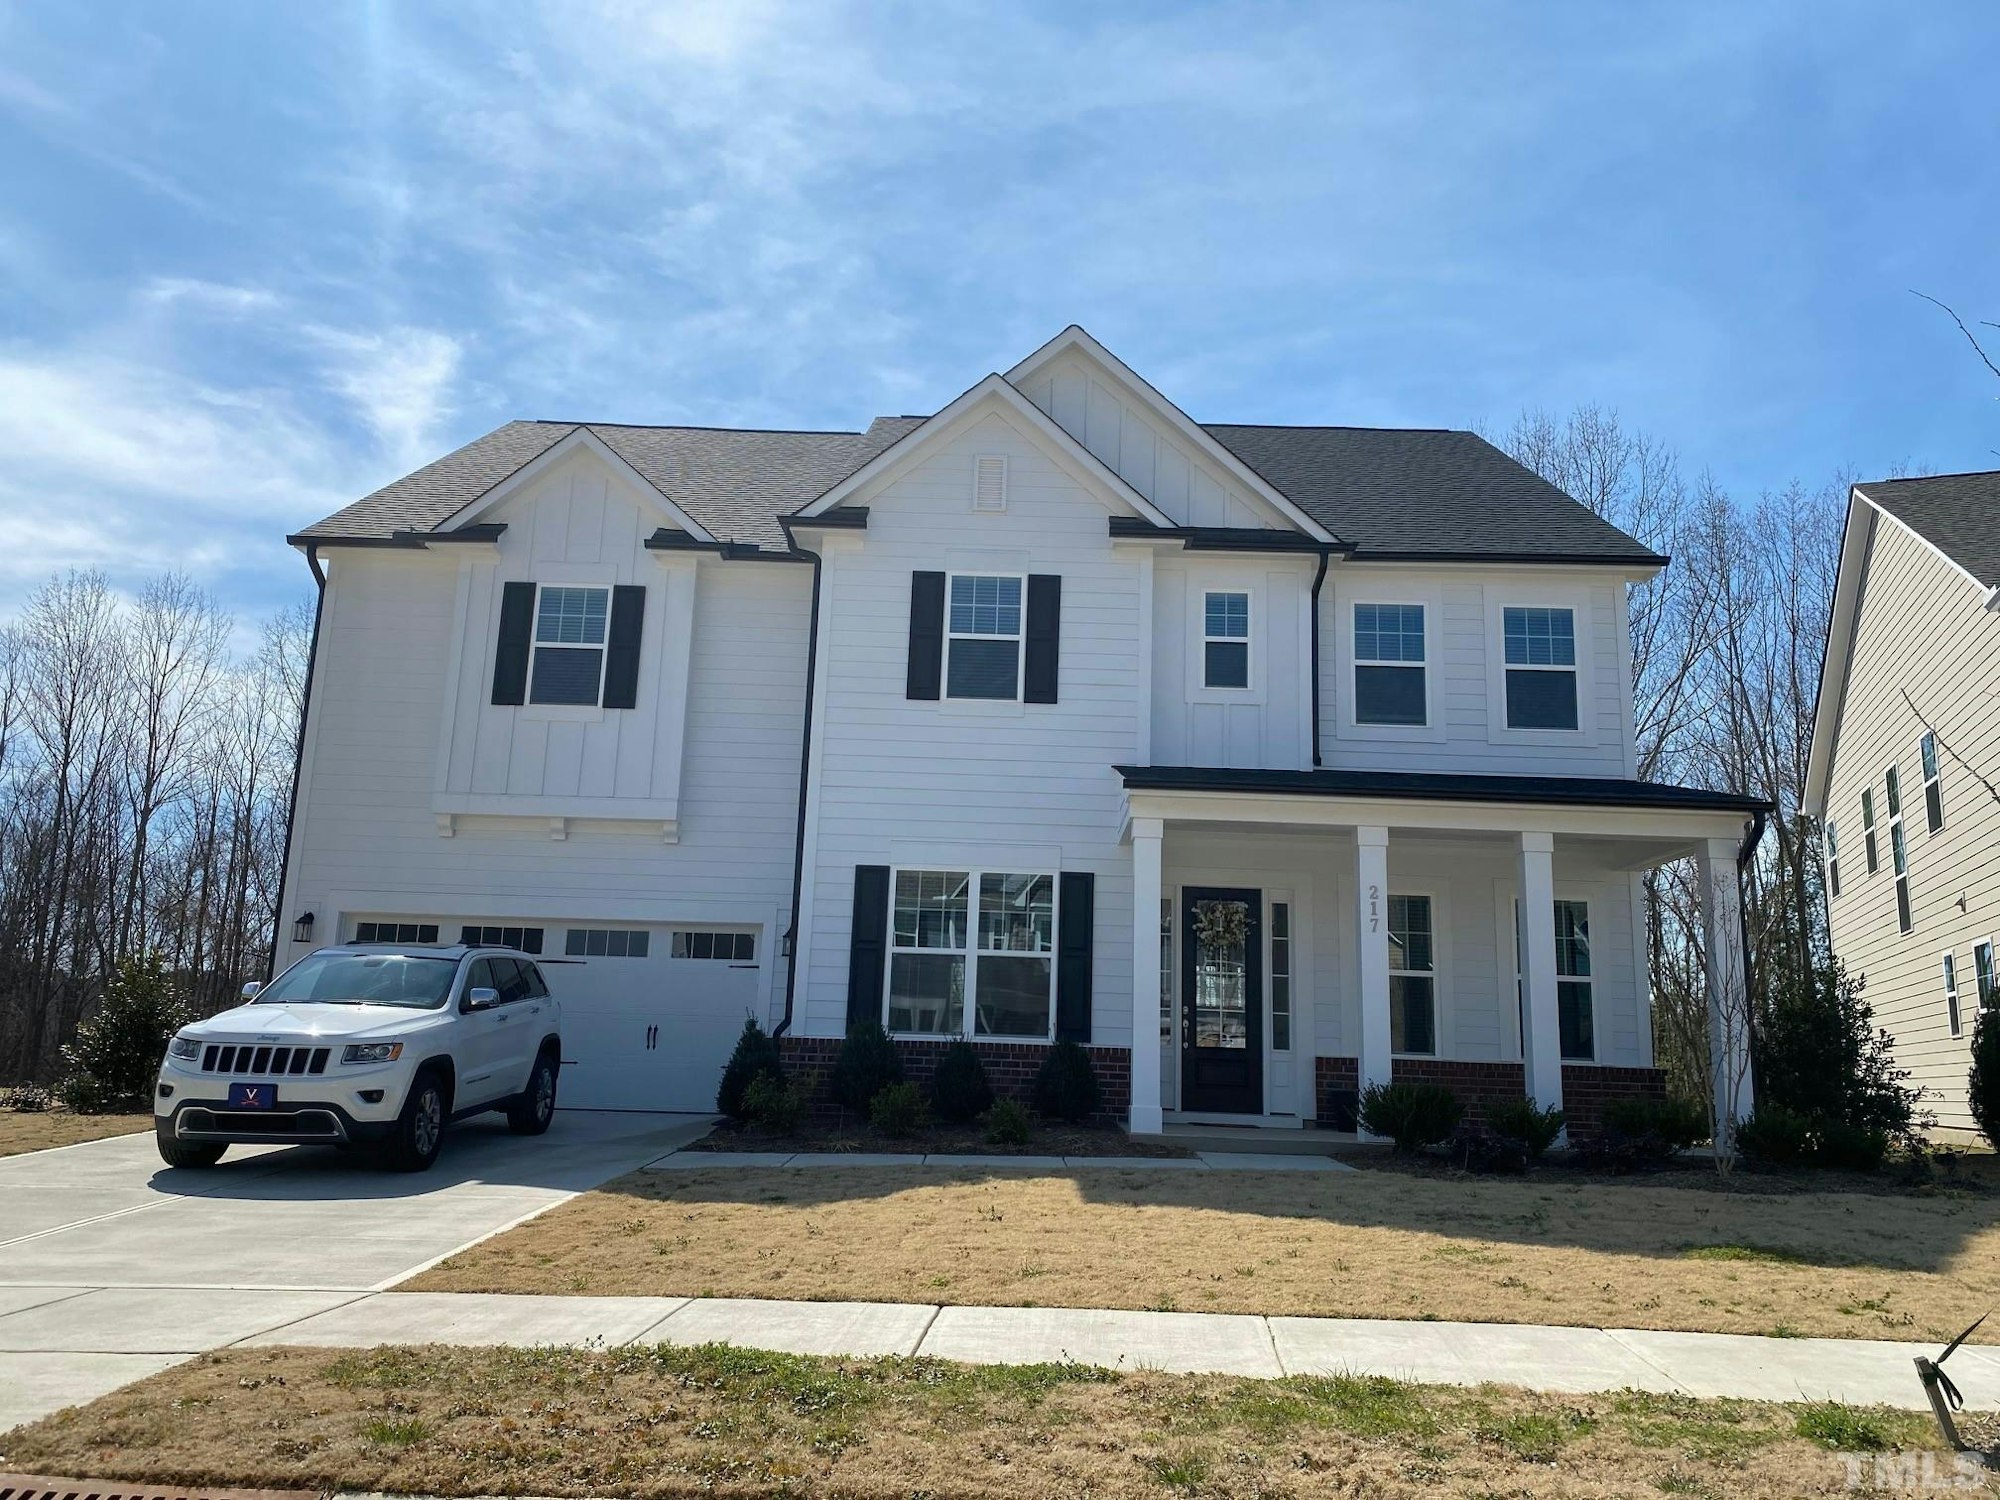 Photo 1 of 1 - 321 Faxton Way #404, Holly Springs, NC 27540